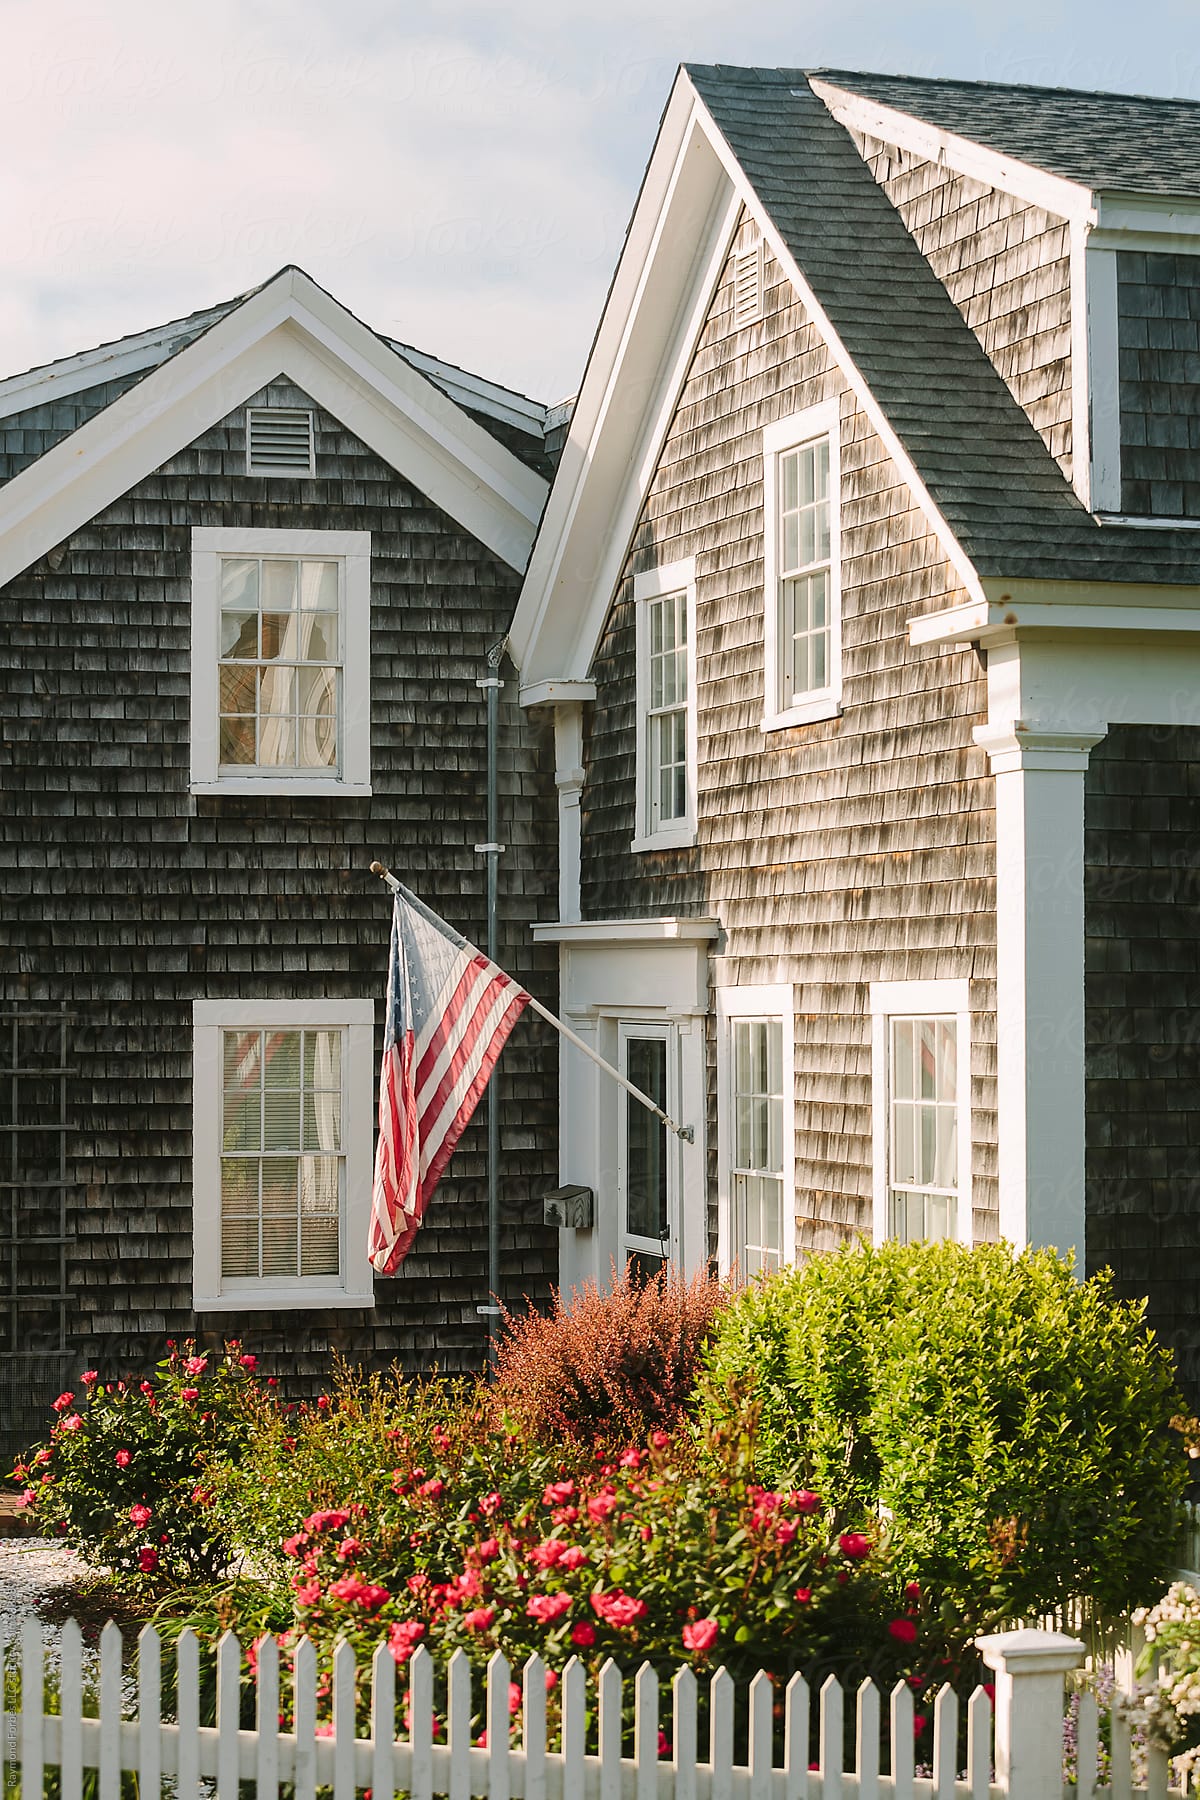 Cape Cod Style House with American Flag